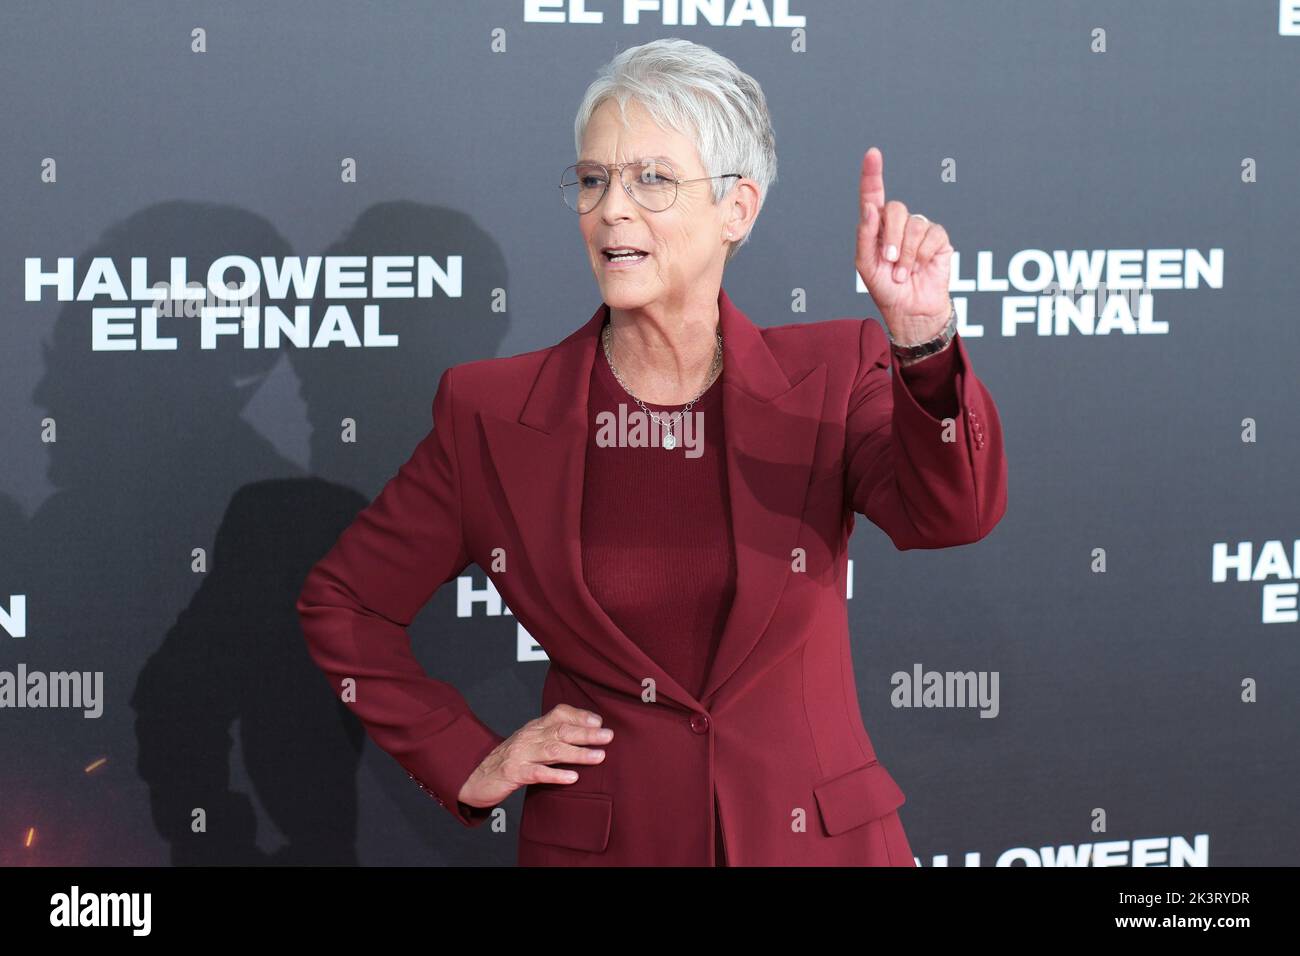 Madrid, Spain. 28th Sep, 2022. American actress, Jamie Lee Curtis attends 'Halloween: El Final' (Halloween Ends) photocall at Villamagna Hotel in Madrid. Credit: SOPA Images Limited/Alamy Live News Stock Photo